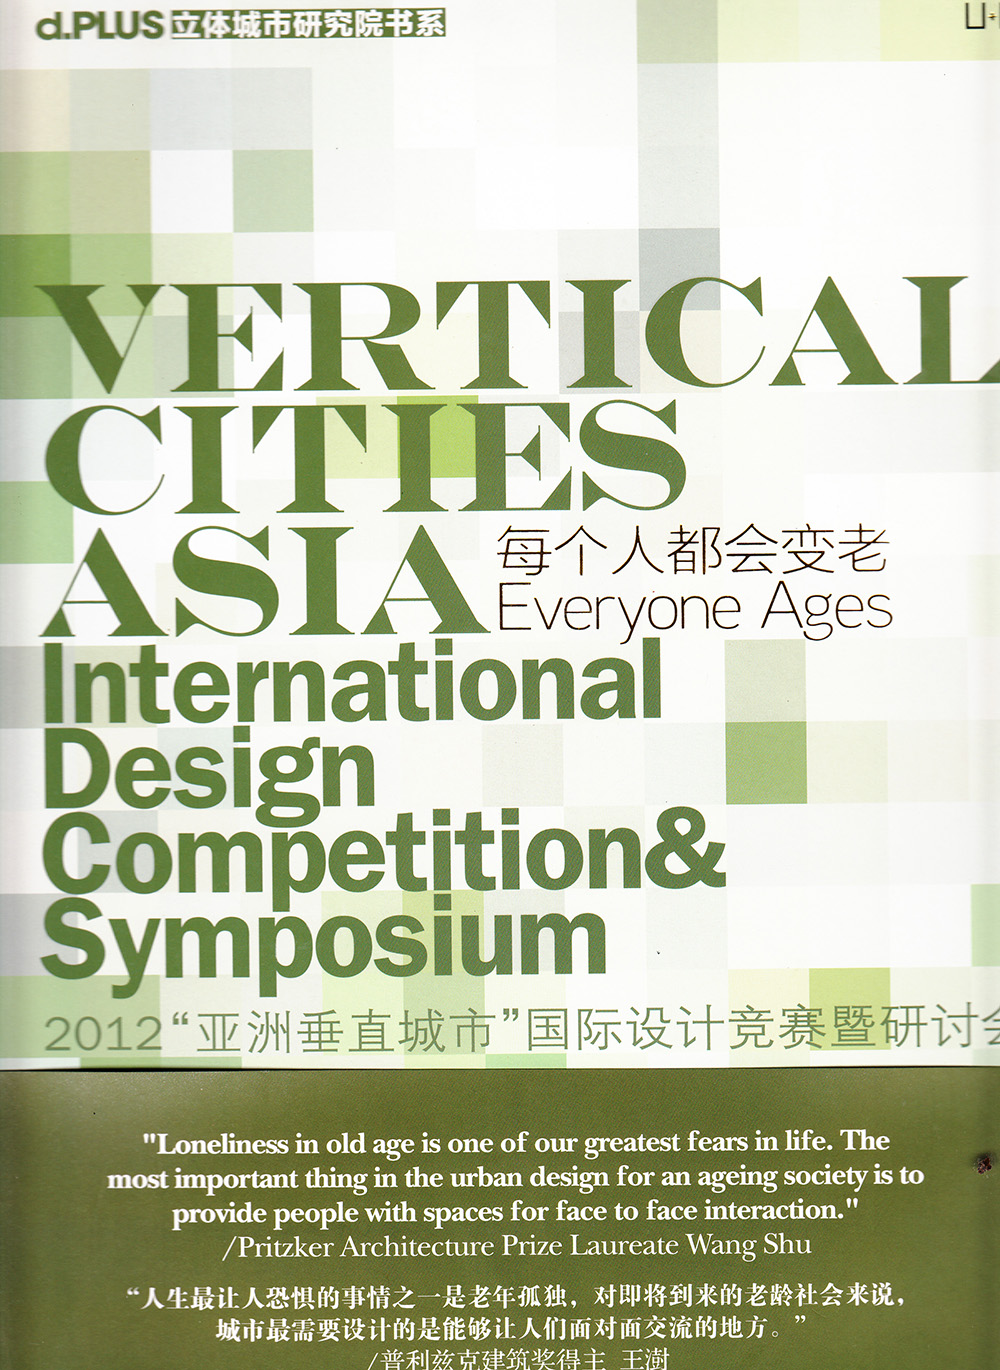 Vertical Cities Asia International Design Competition and Symposium 2012 Volume 2: Everyone Ages